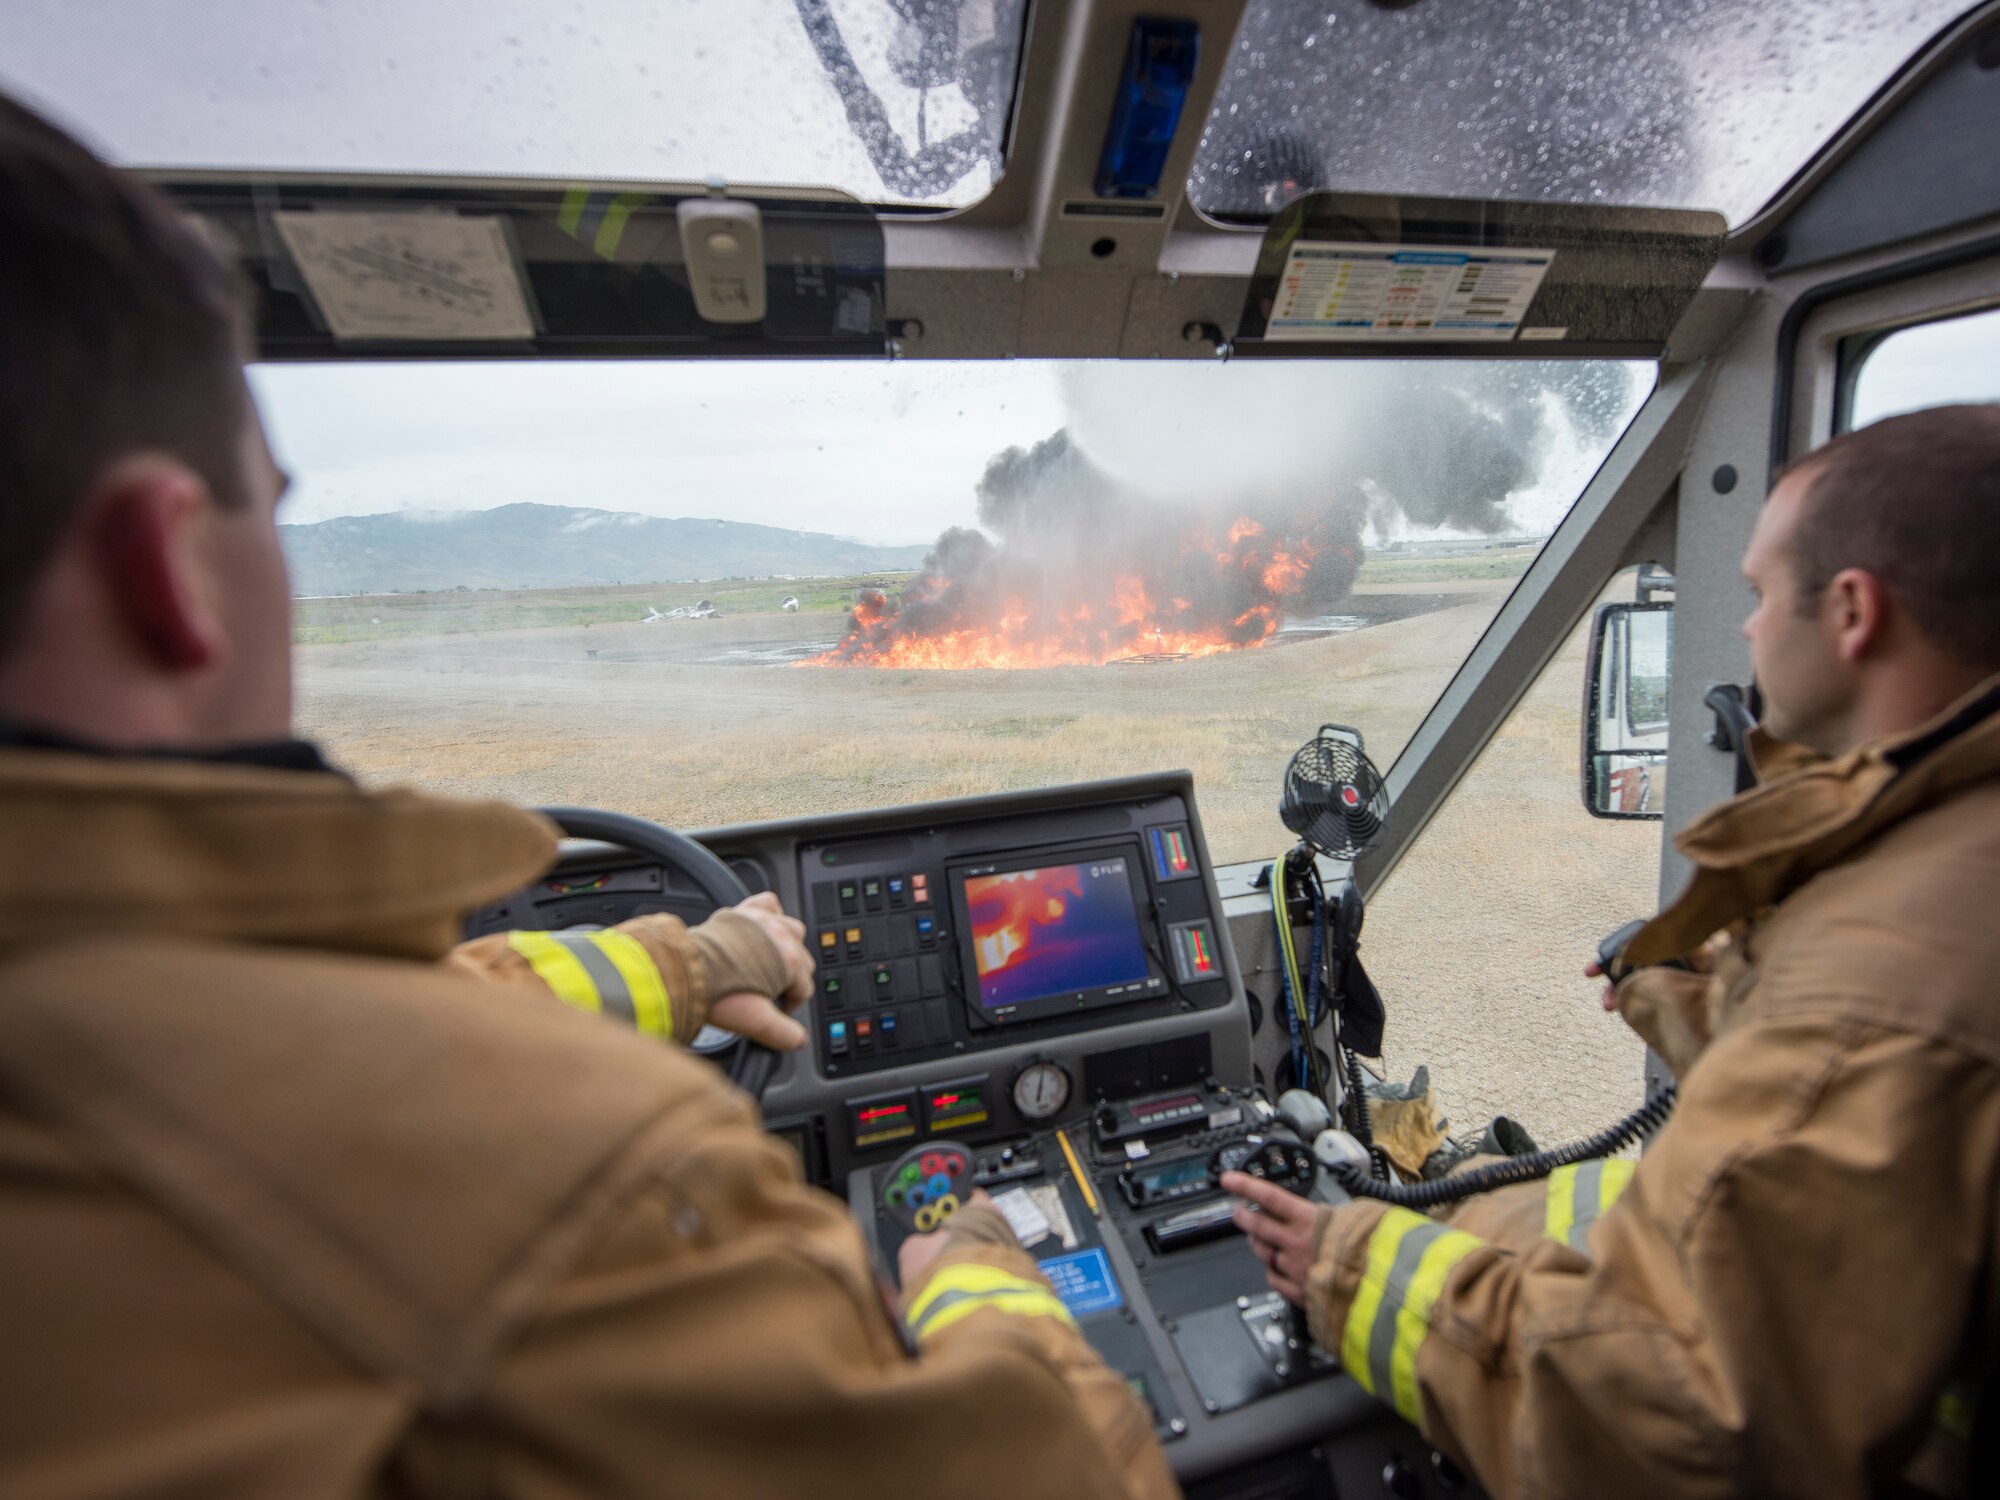 Two male fire fighters in their brown and yellow fire suits sit inside a fire truck that is overlooking a fire with billowing black smoke. Inside the cab of the fire truck is an infrared screen showing the heat from the fire.